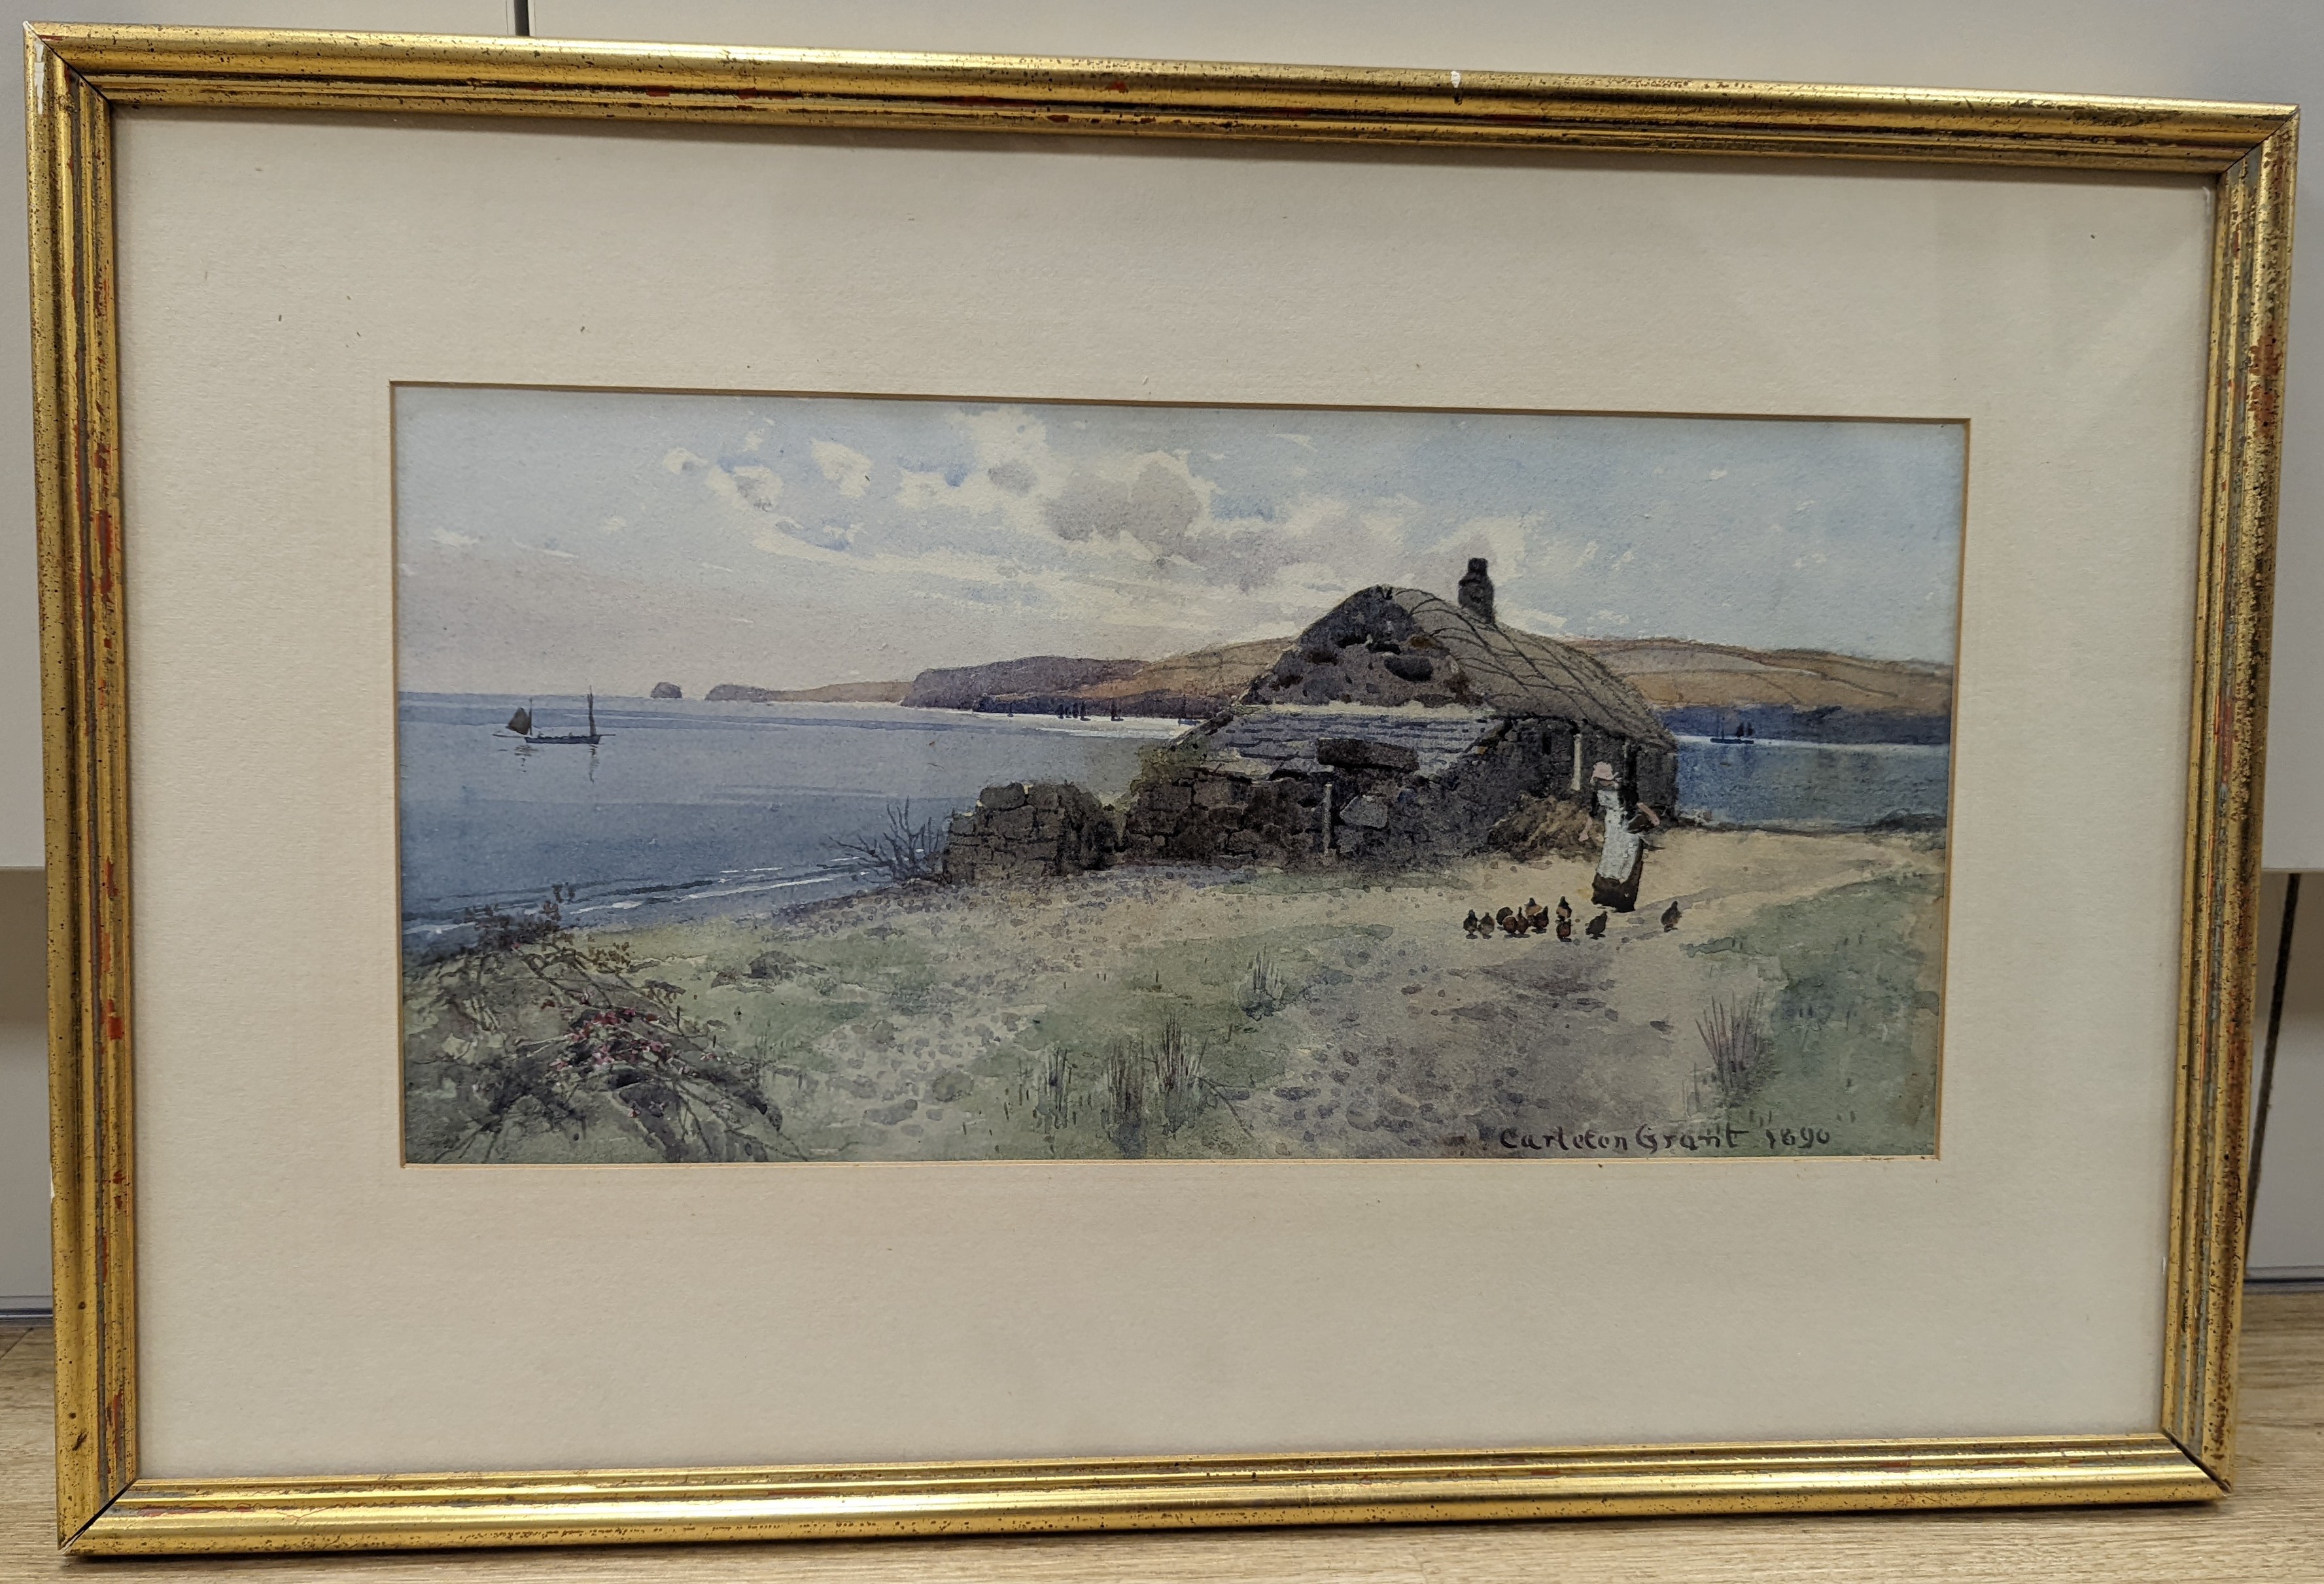 Carleton Grant (1860-1930), watercolour, Coastal scene with woman feeding chickens beside a cottage, signed and dated 1890, 18 x 37cm